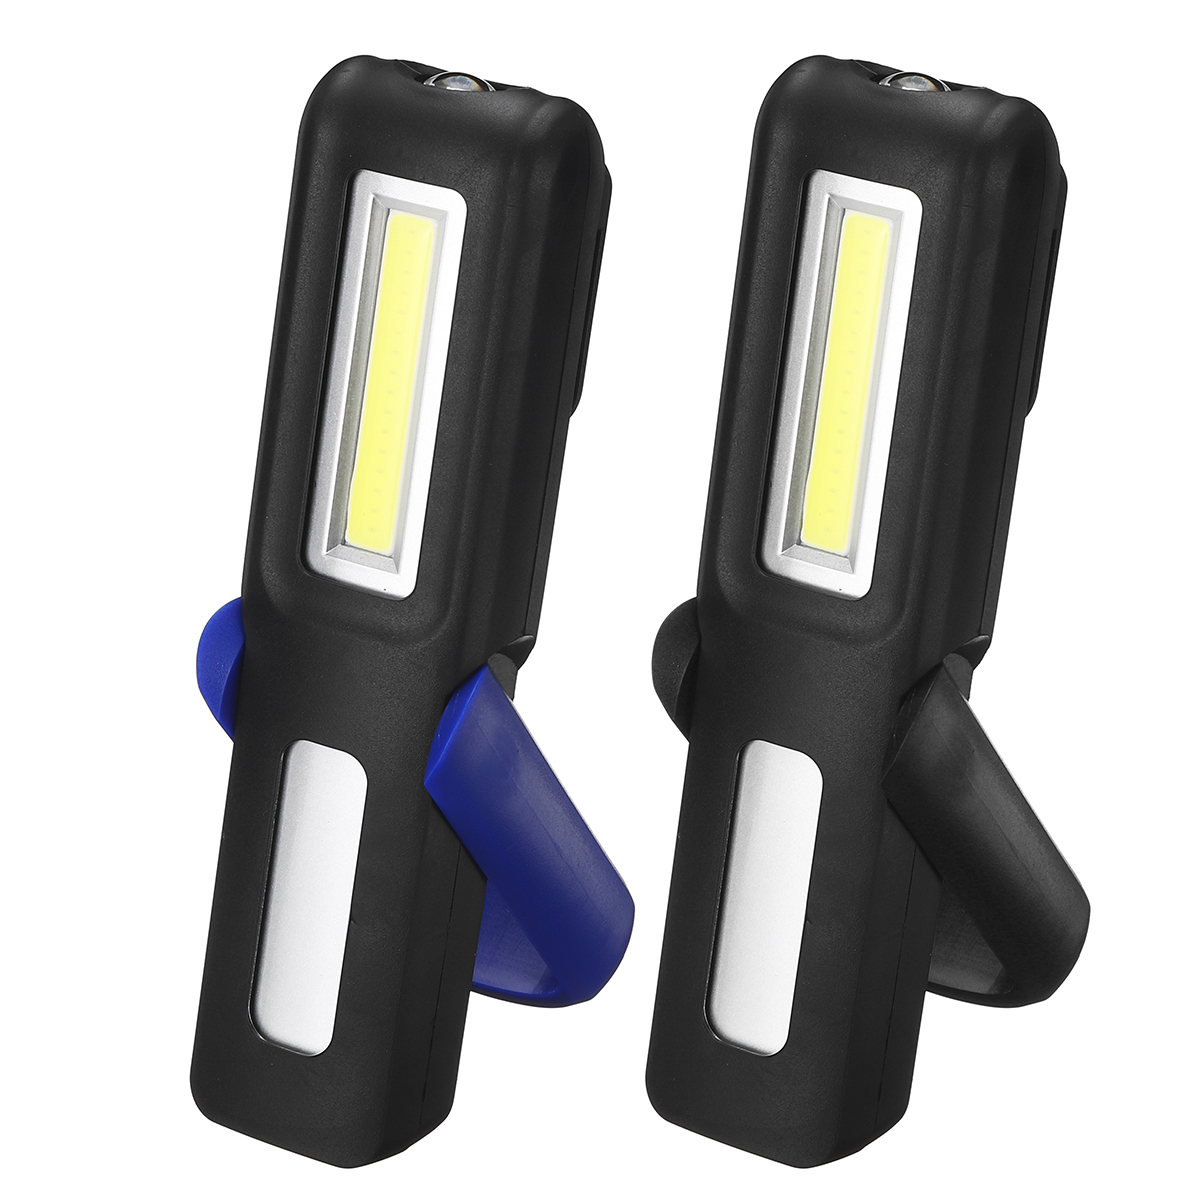 

3W LED COB USB Work Light Outdoor Portable Magnetic Flashlight Torch Emergency Lantern With Hook